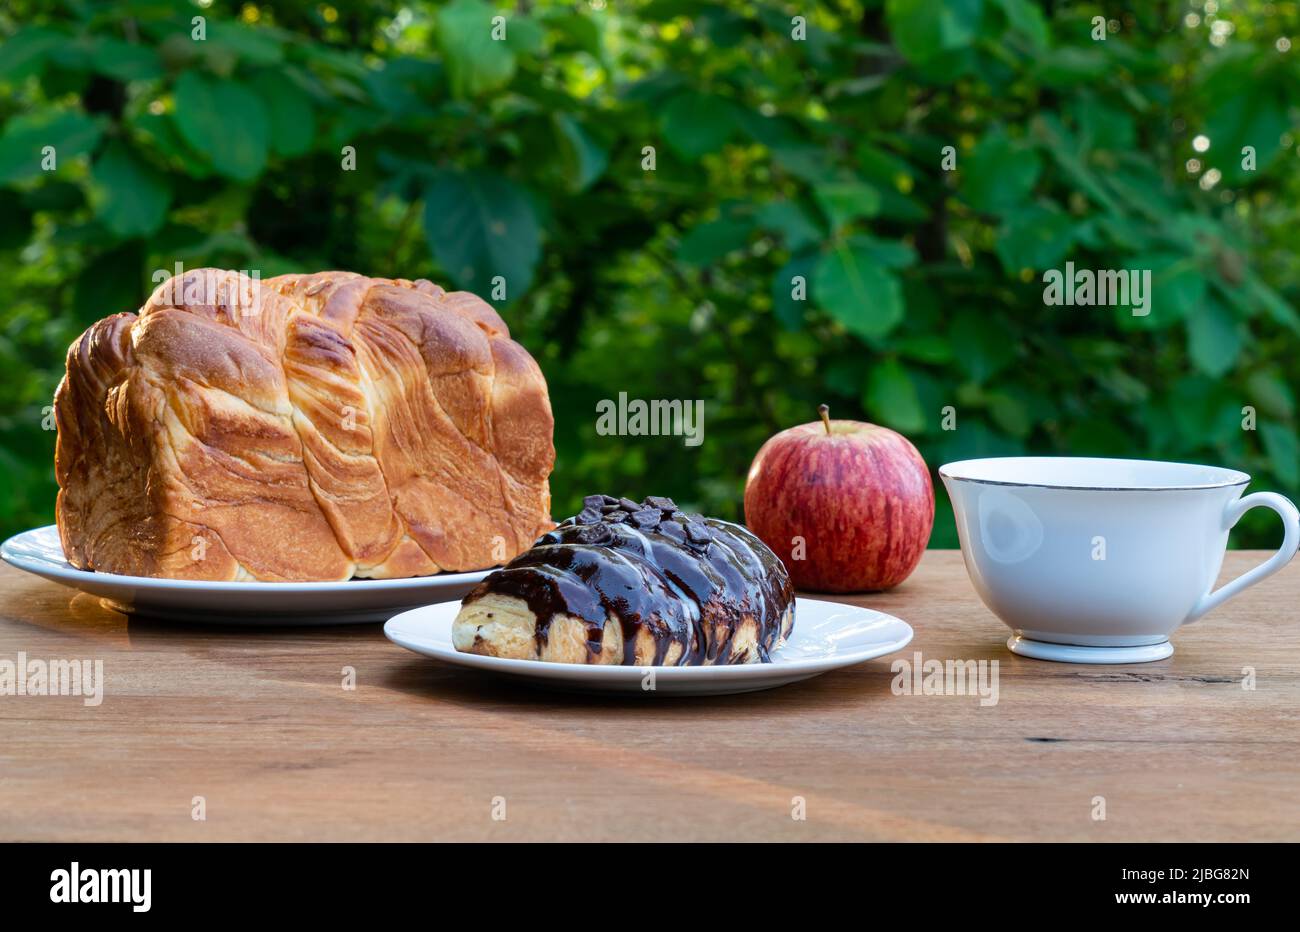 Breakfast at a green teak forest background. Breakfast with a loaf of homemade bread in white ceramic dish, a chocolate croissant, a ripe red apple an Stock Photo